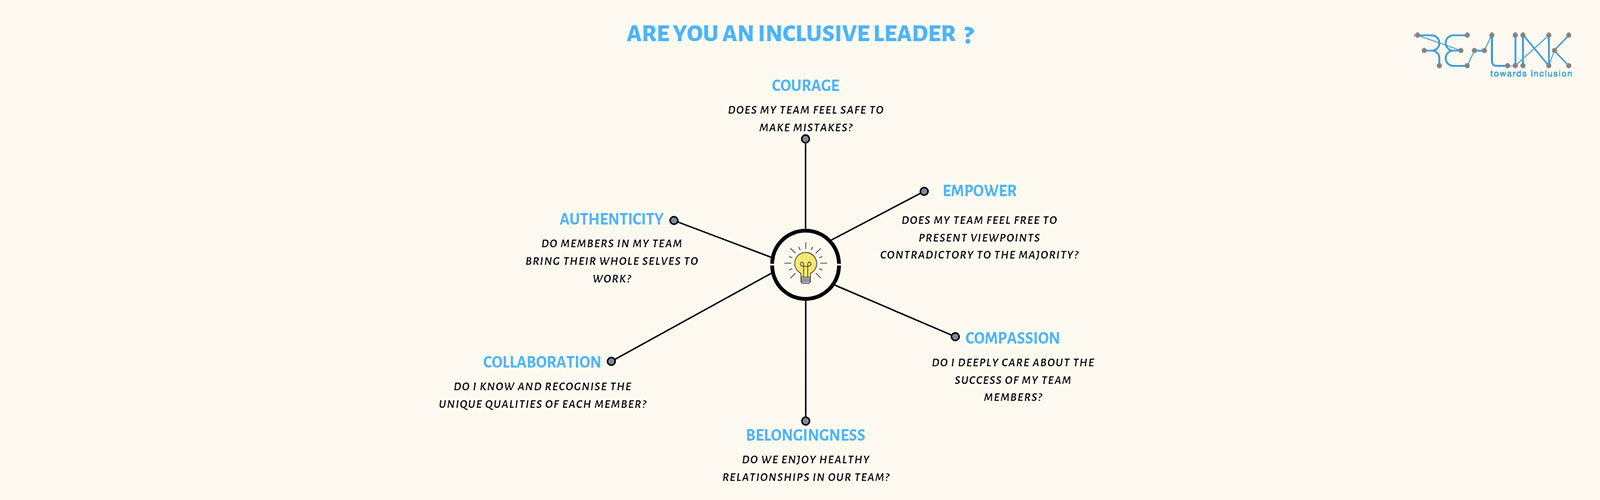 are-you an inclusive leader